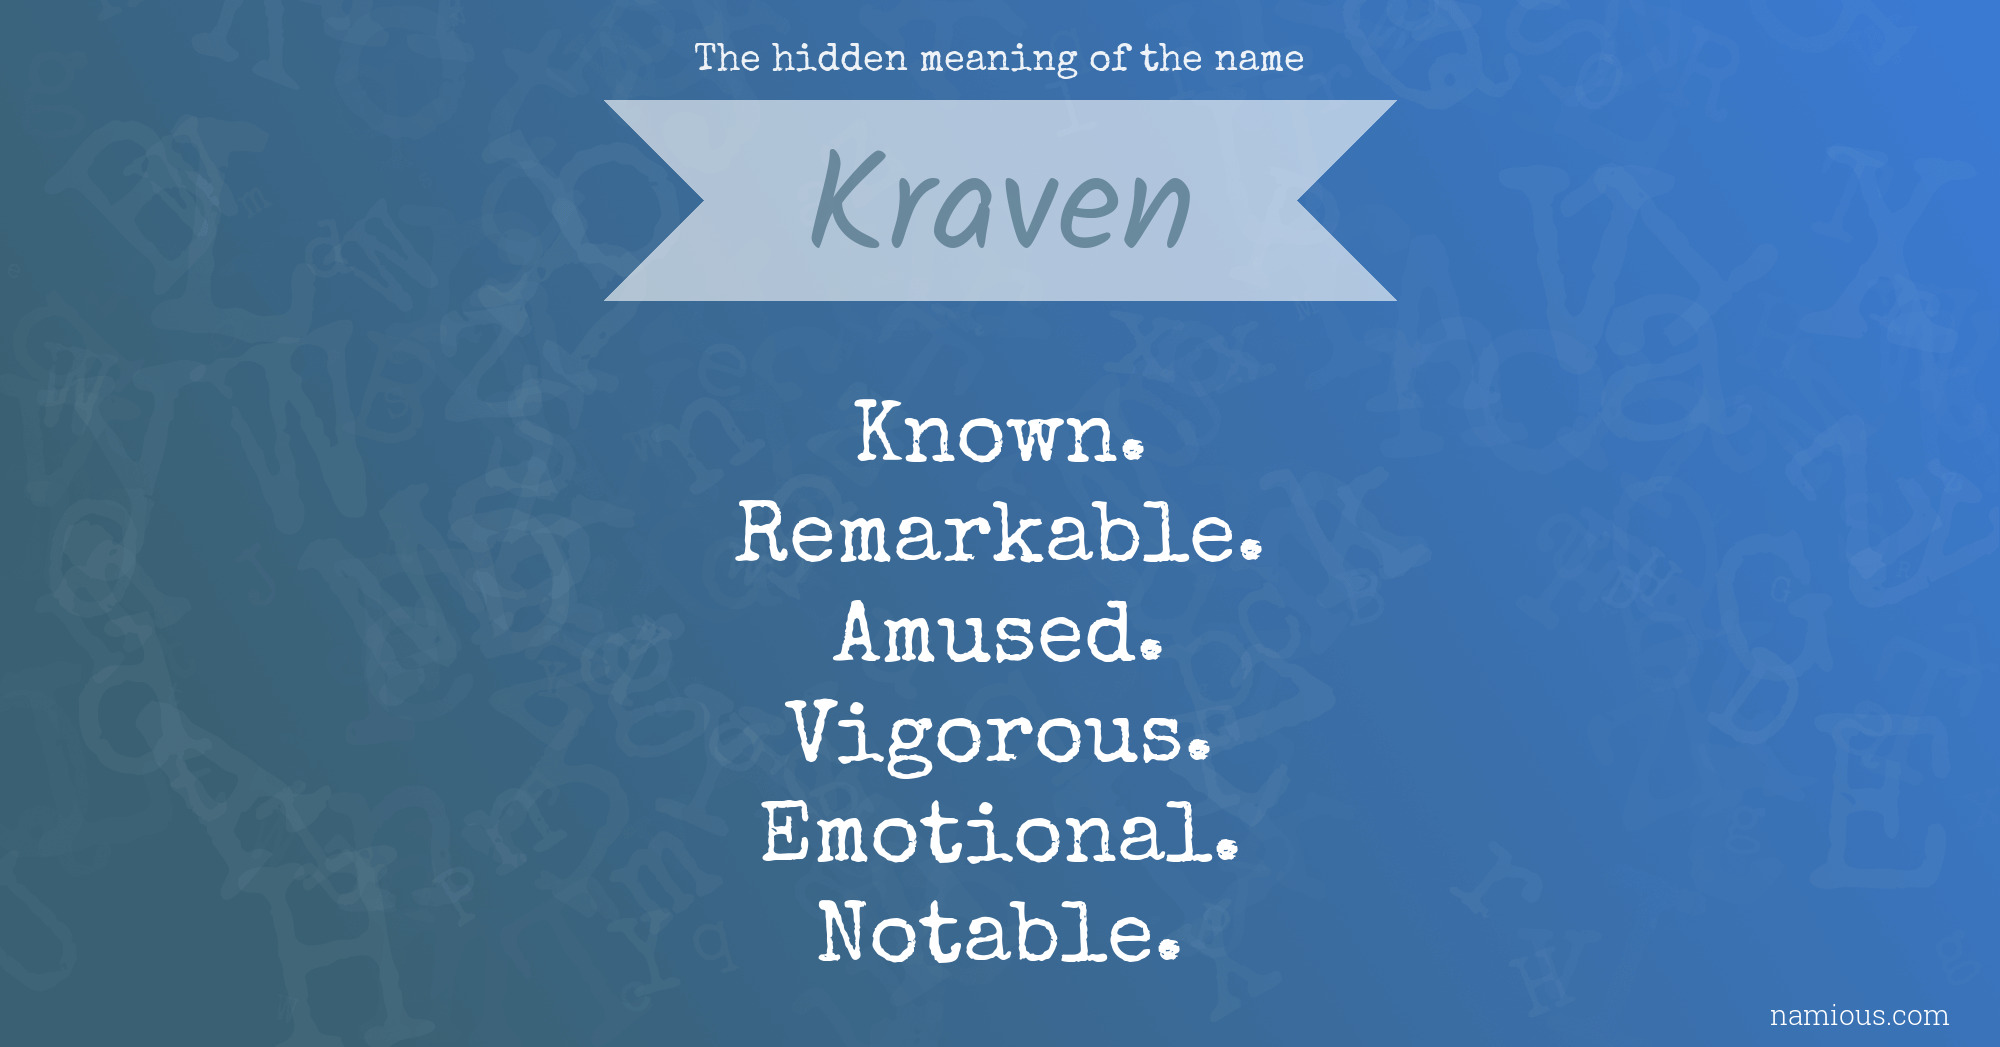 The hidden meaning of the name Kraven